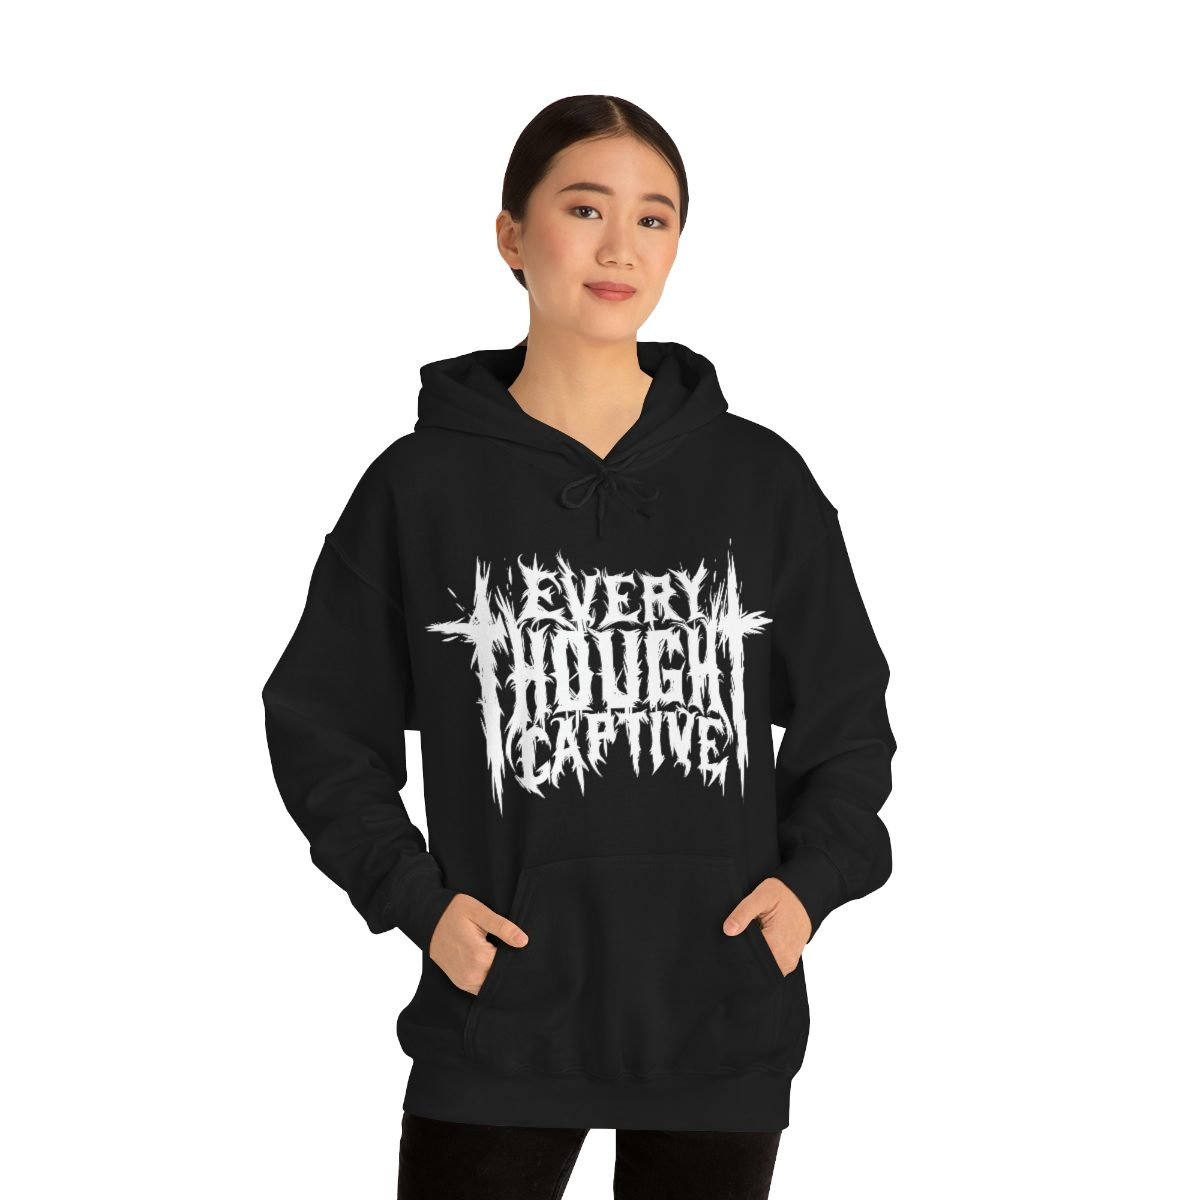 Every Thought Captive Pullover Hooded Sweatshirt